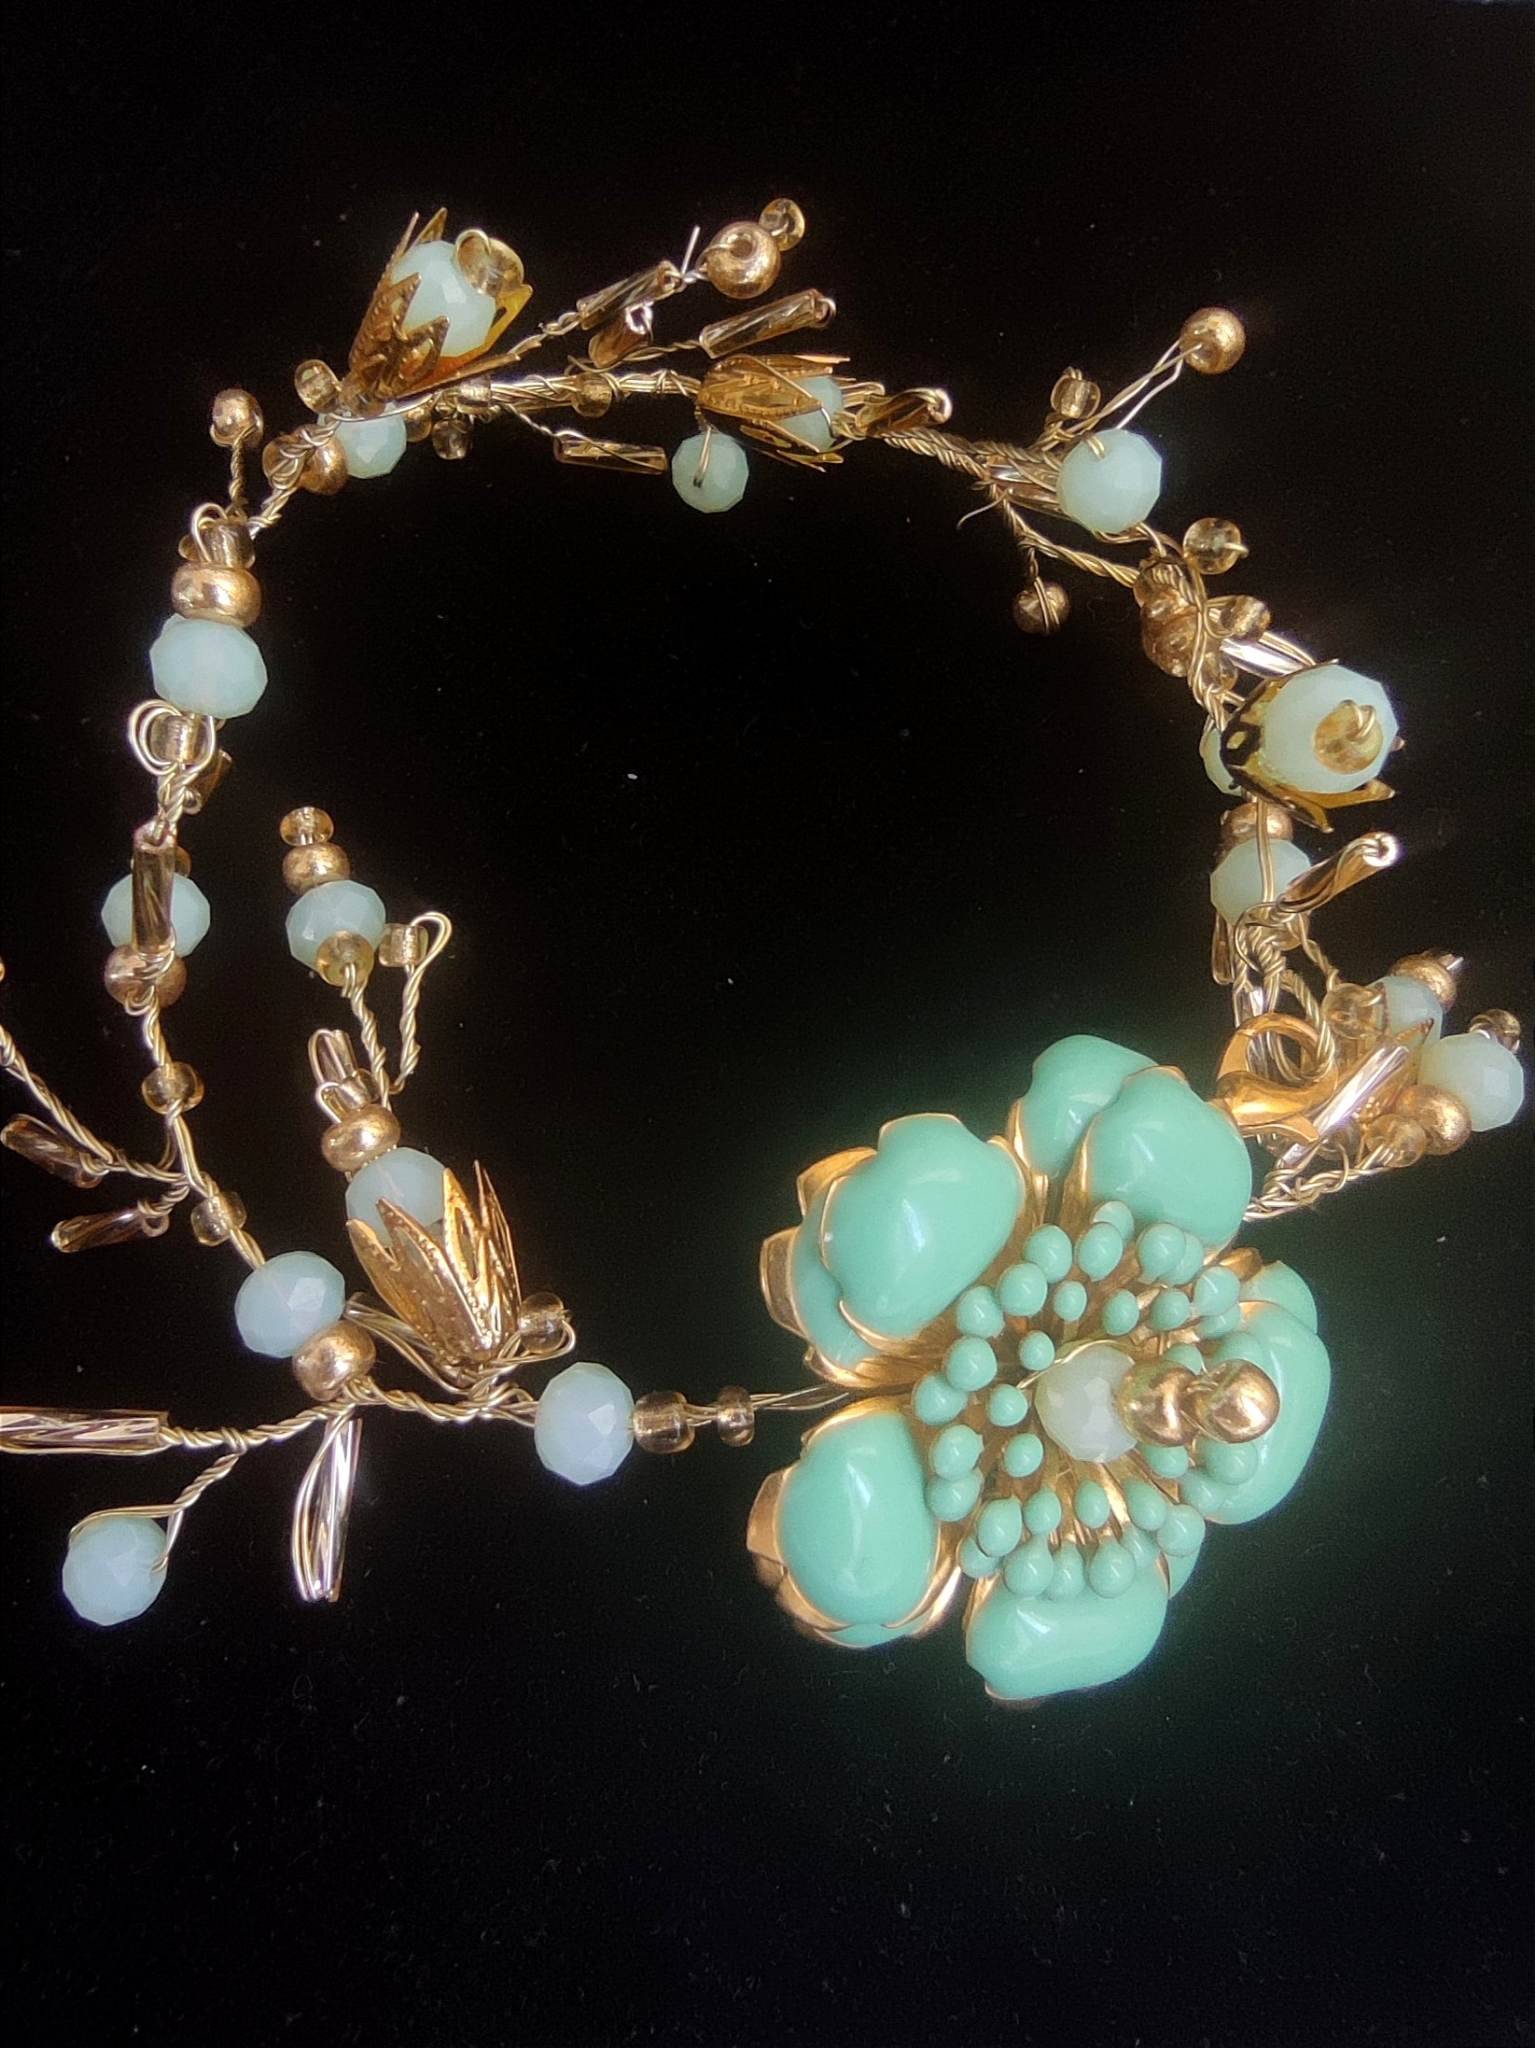 Stylish Bracelet in Light Green and Gold colors with Swarovski Crystals and Flowers - Light Green Luxury